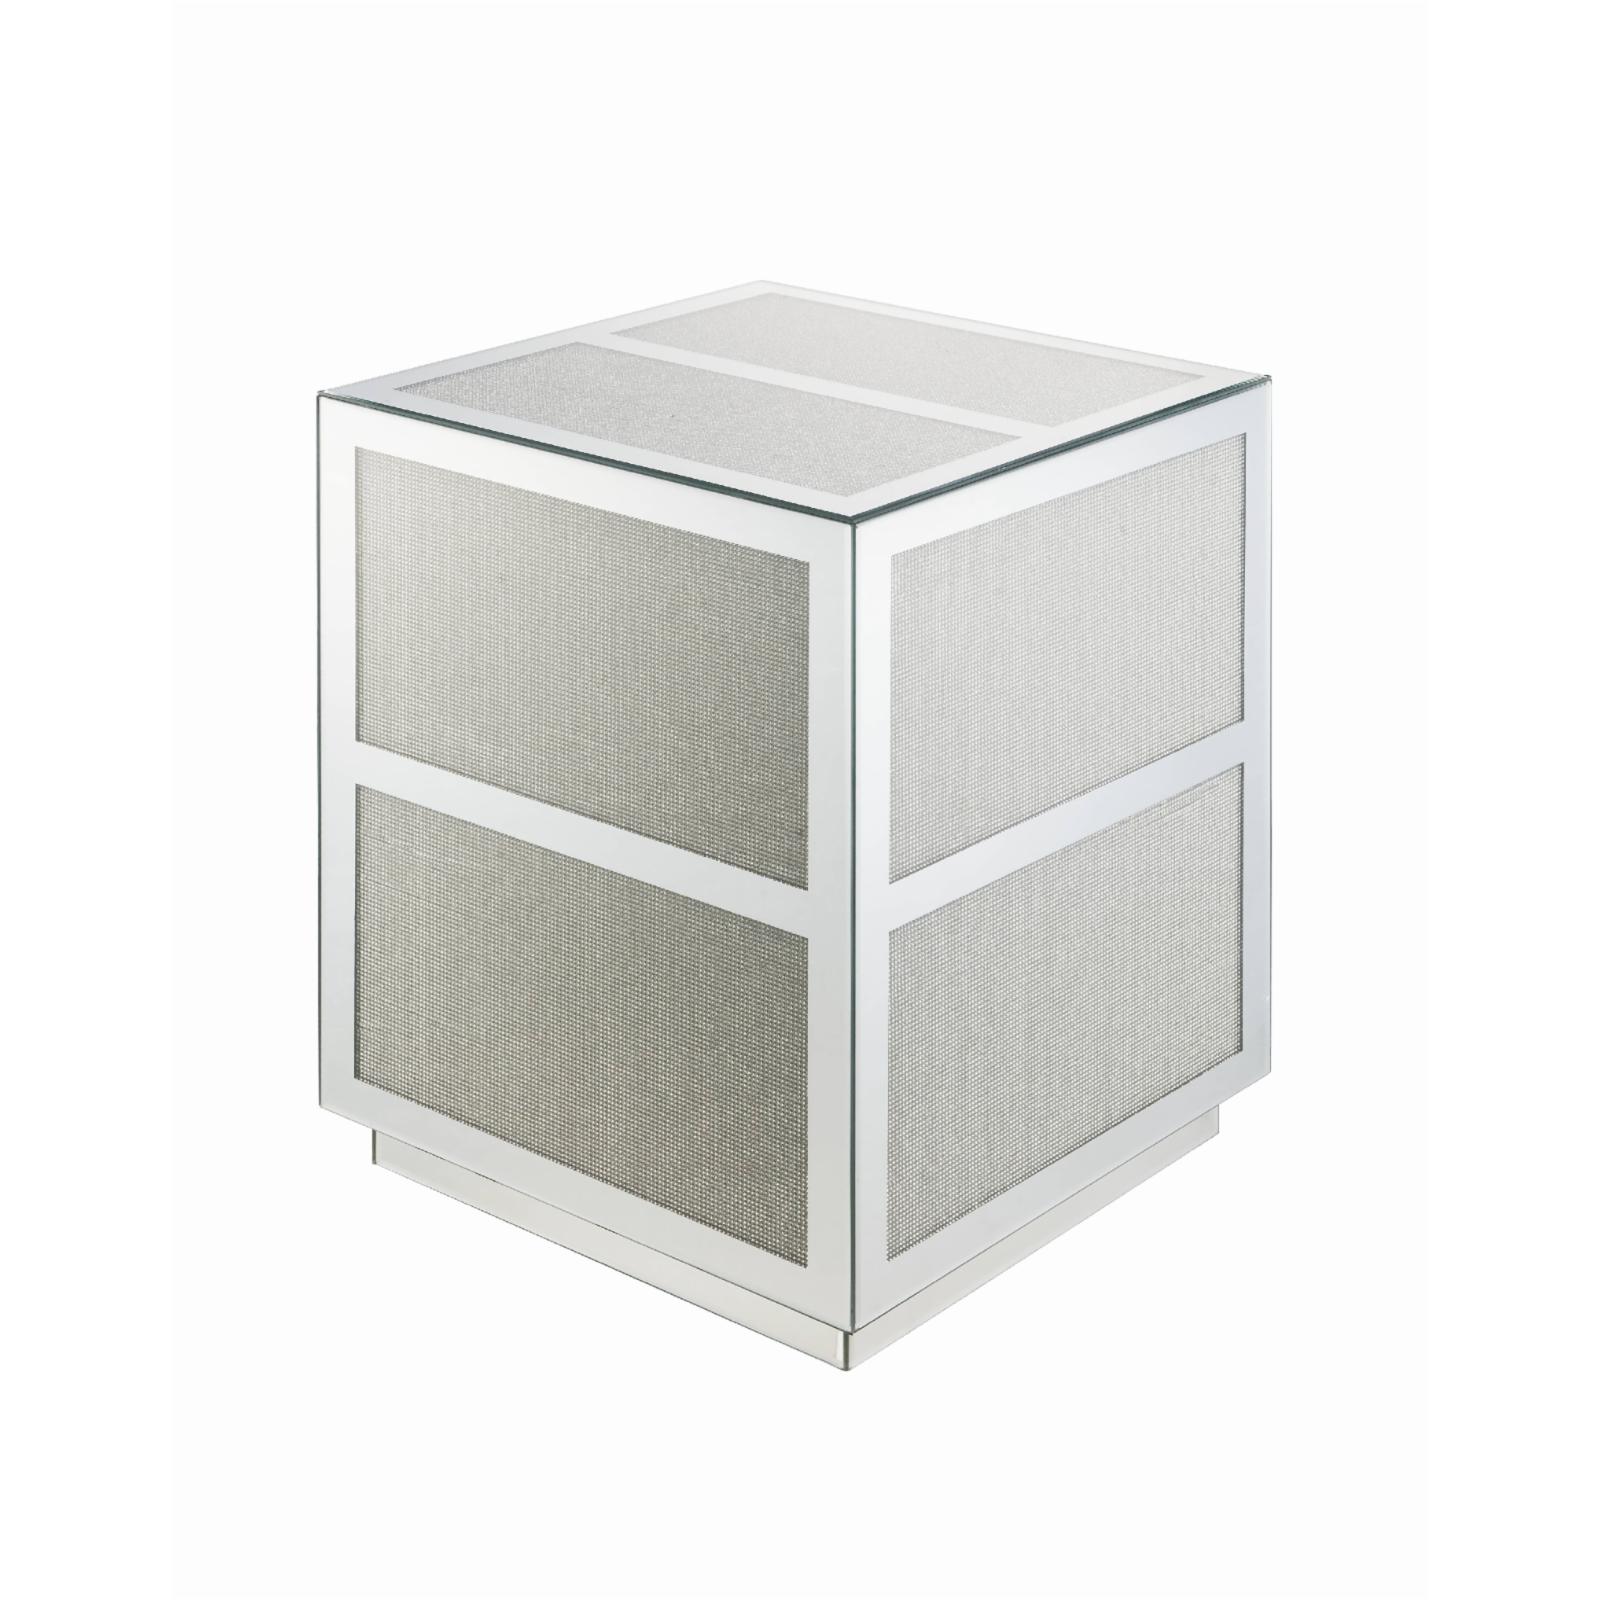 ACME Lavina End Table in Mirrored and Faux Diamonds - image 1 of 4